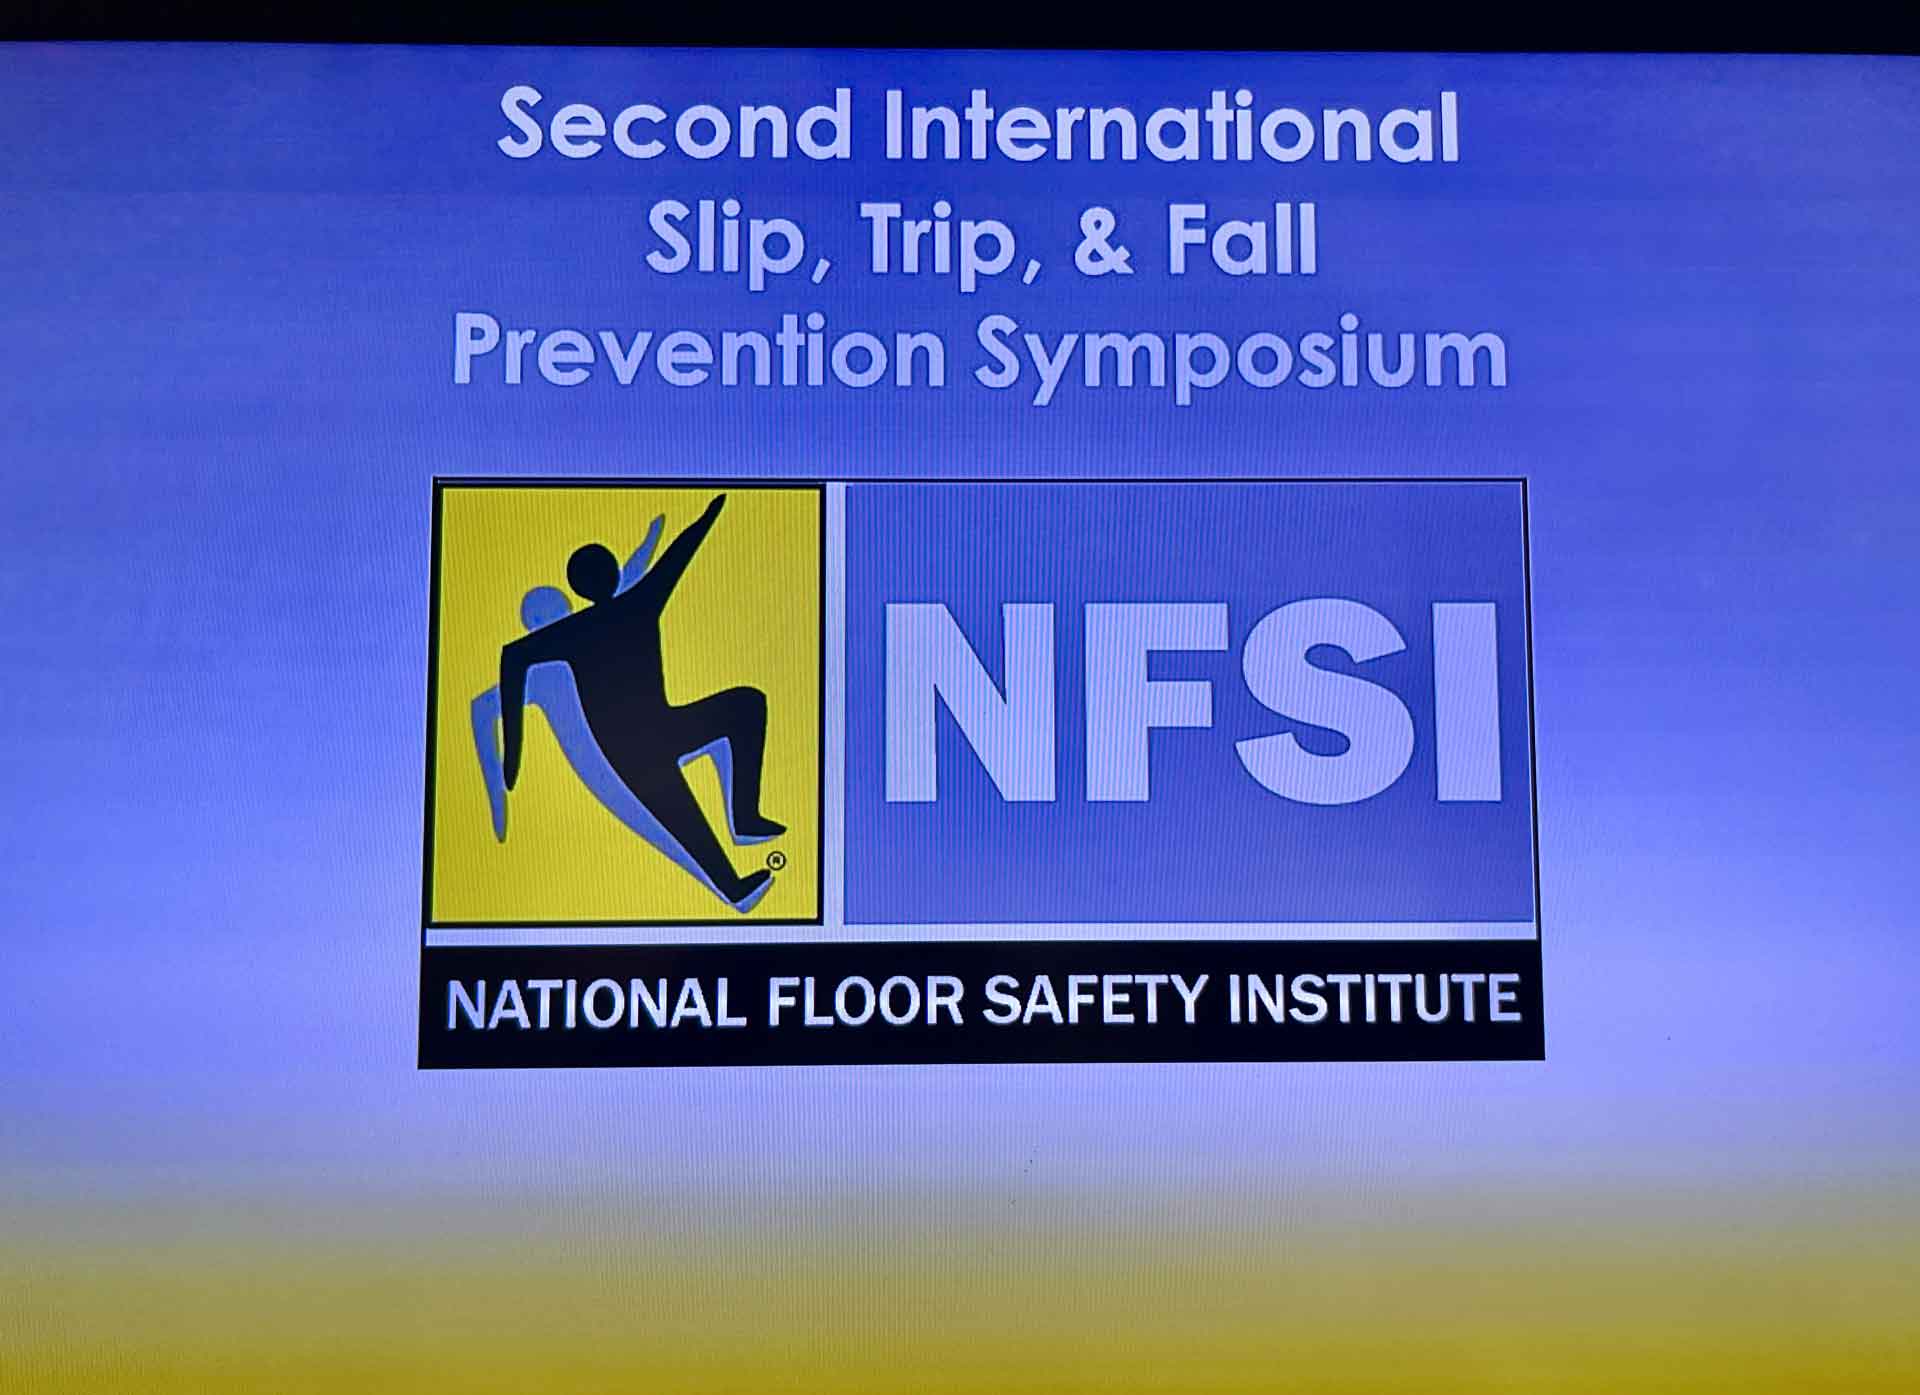 Slips, trips, and falls